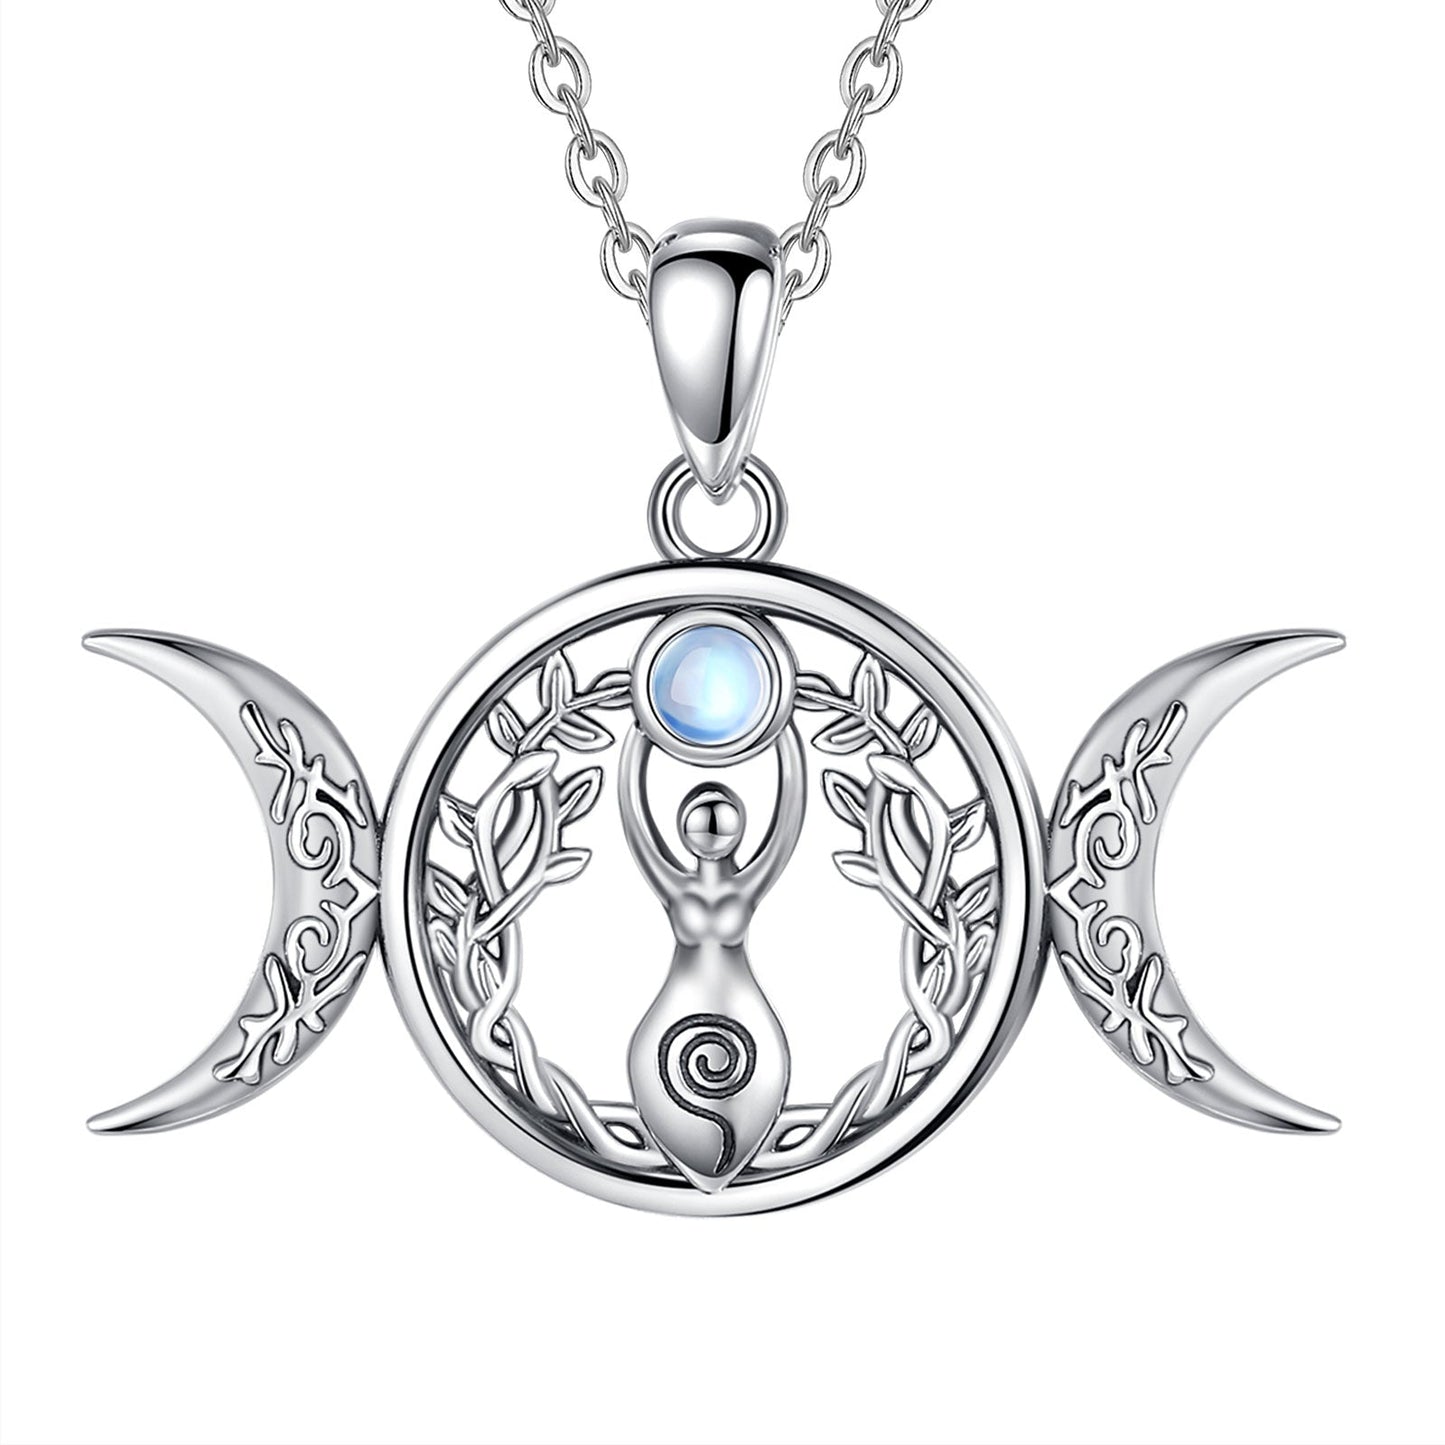 acelimosf™-Triple Moon Goddess Necklace Pagan Jewelry